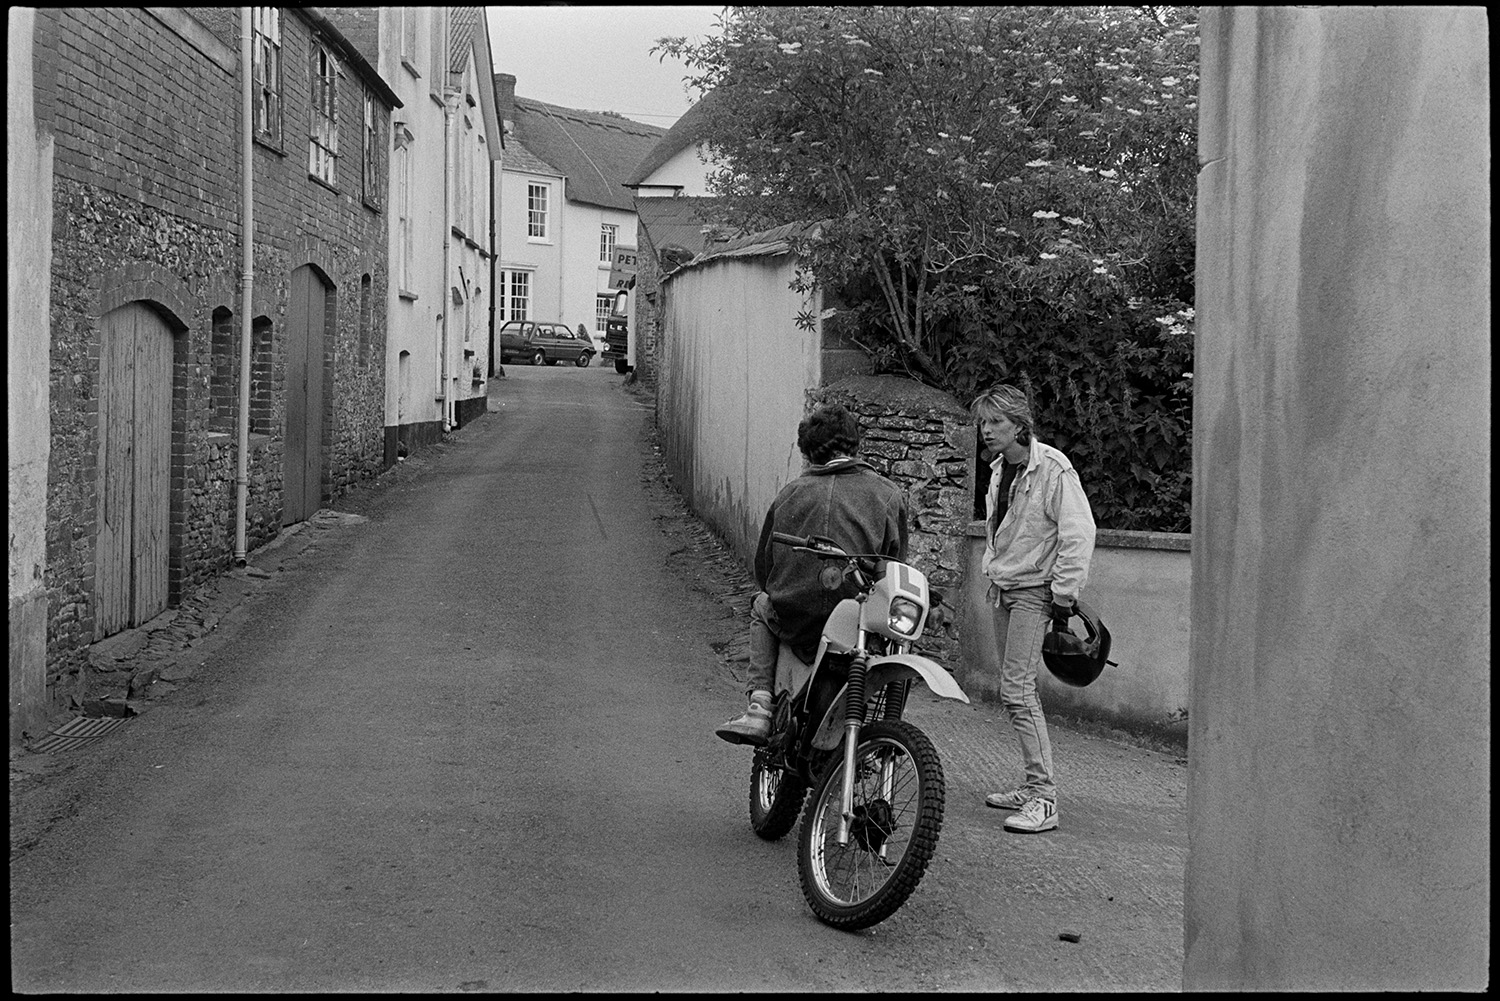 Street scenes with people and cars.
[Two young men talking in a narrow street in Chulmleigh. One is sitting backwards on a motorbike.]